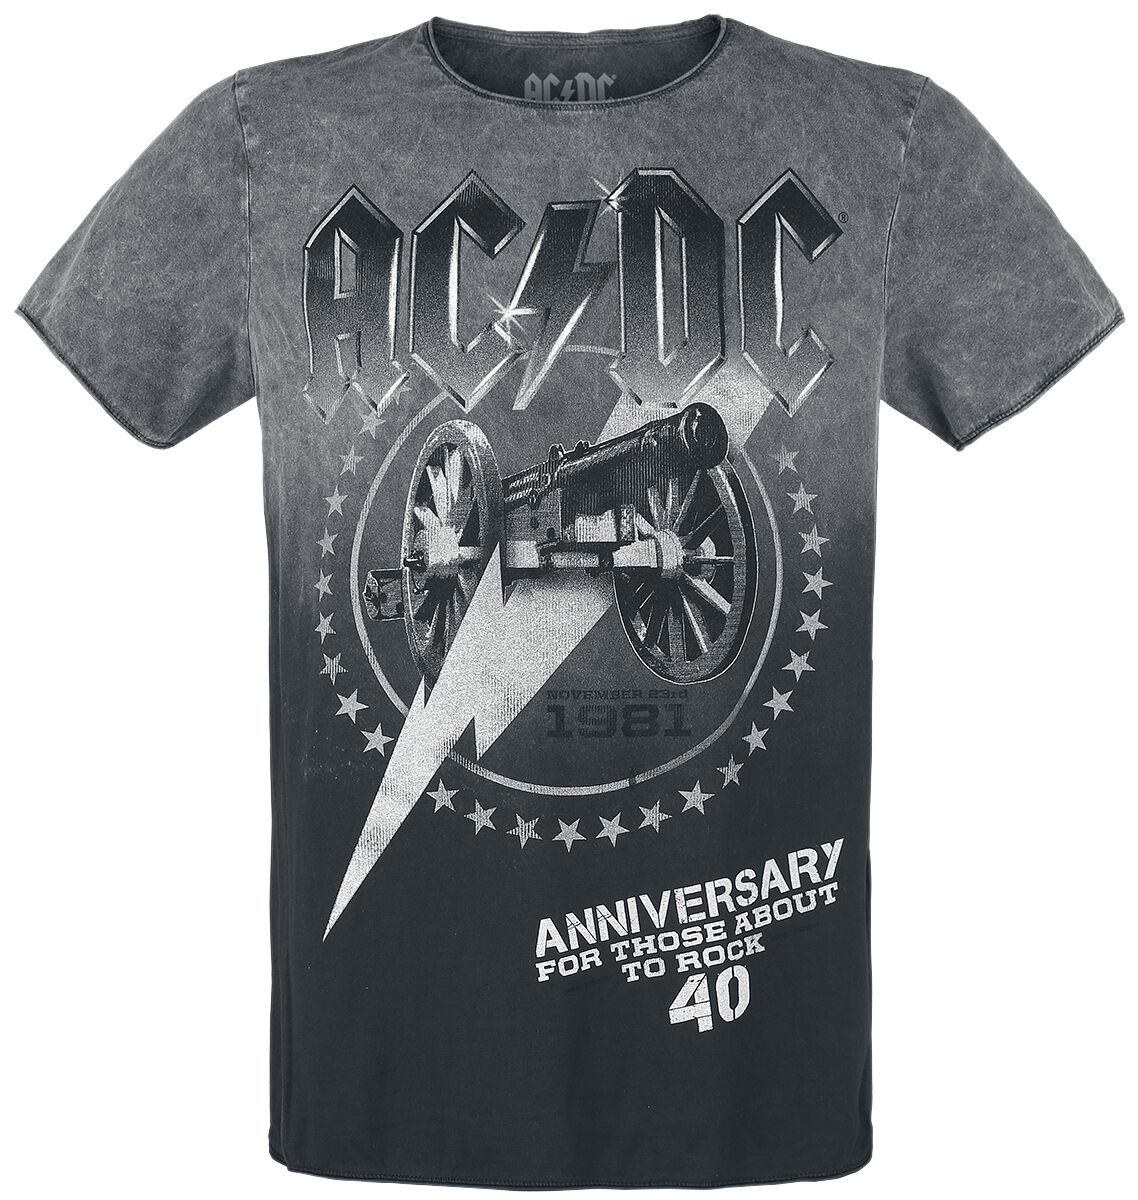 AC/DC For Those About To Rock 40th Anniversary T-Shirt grey black